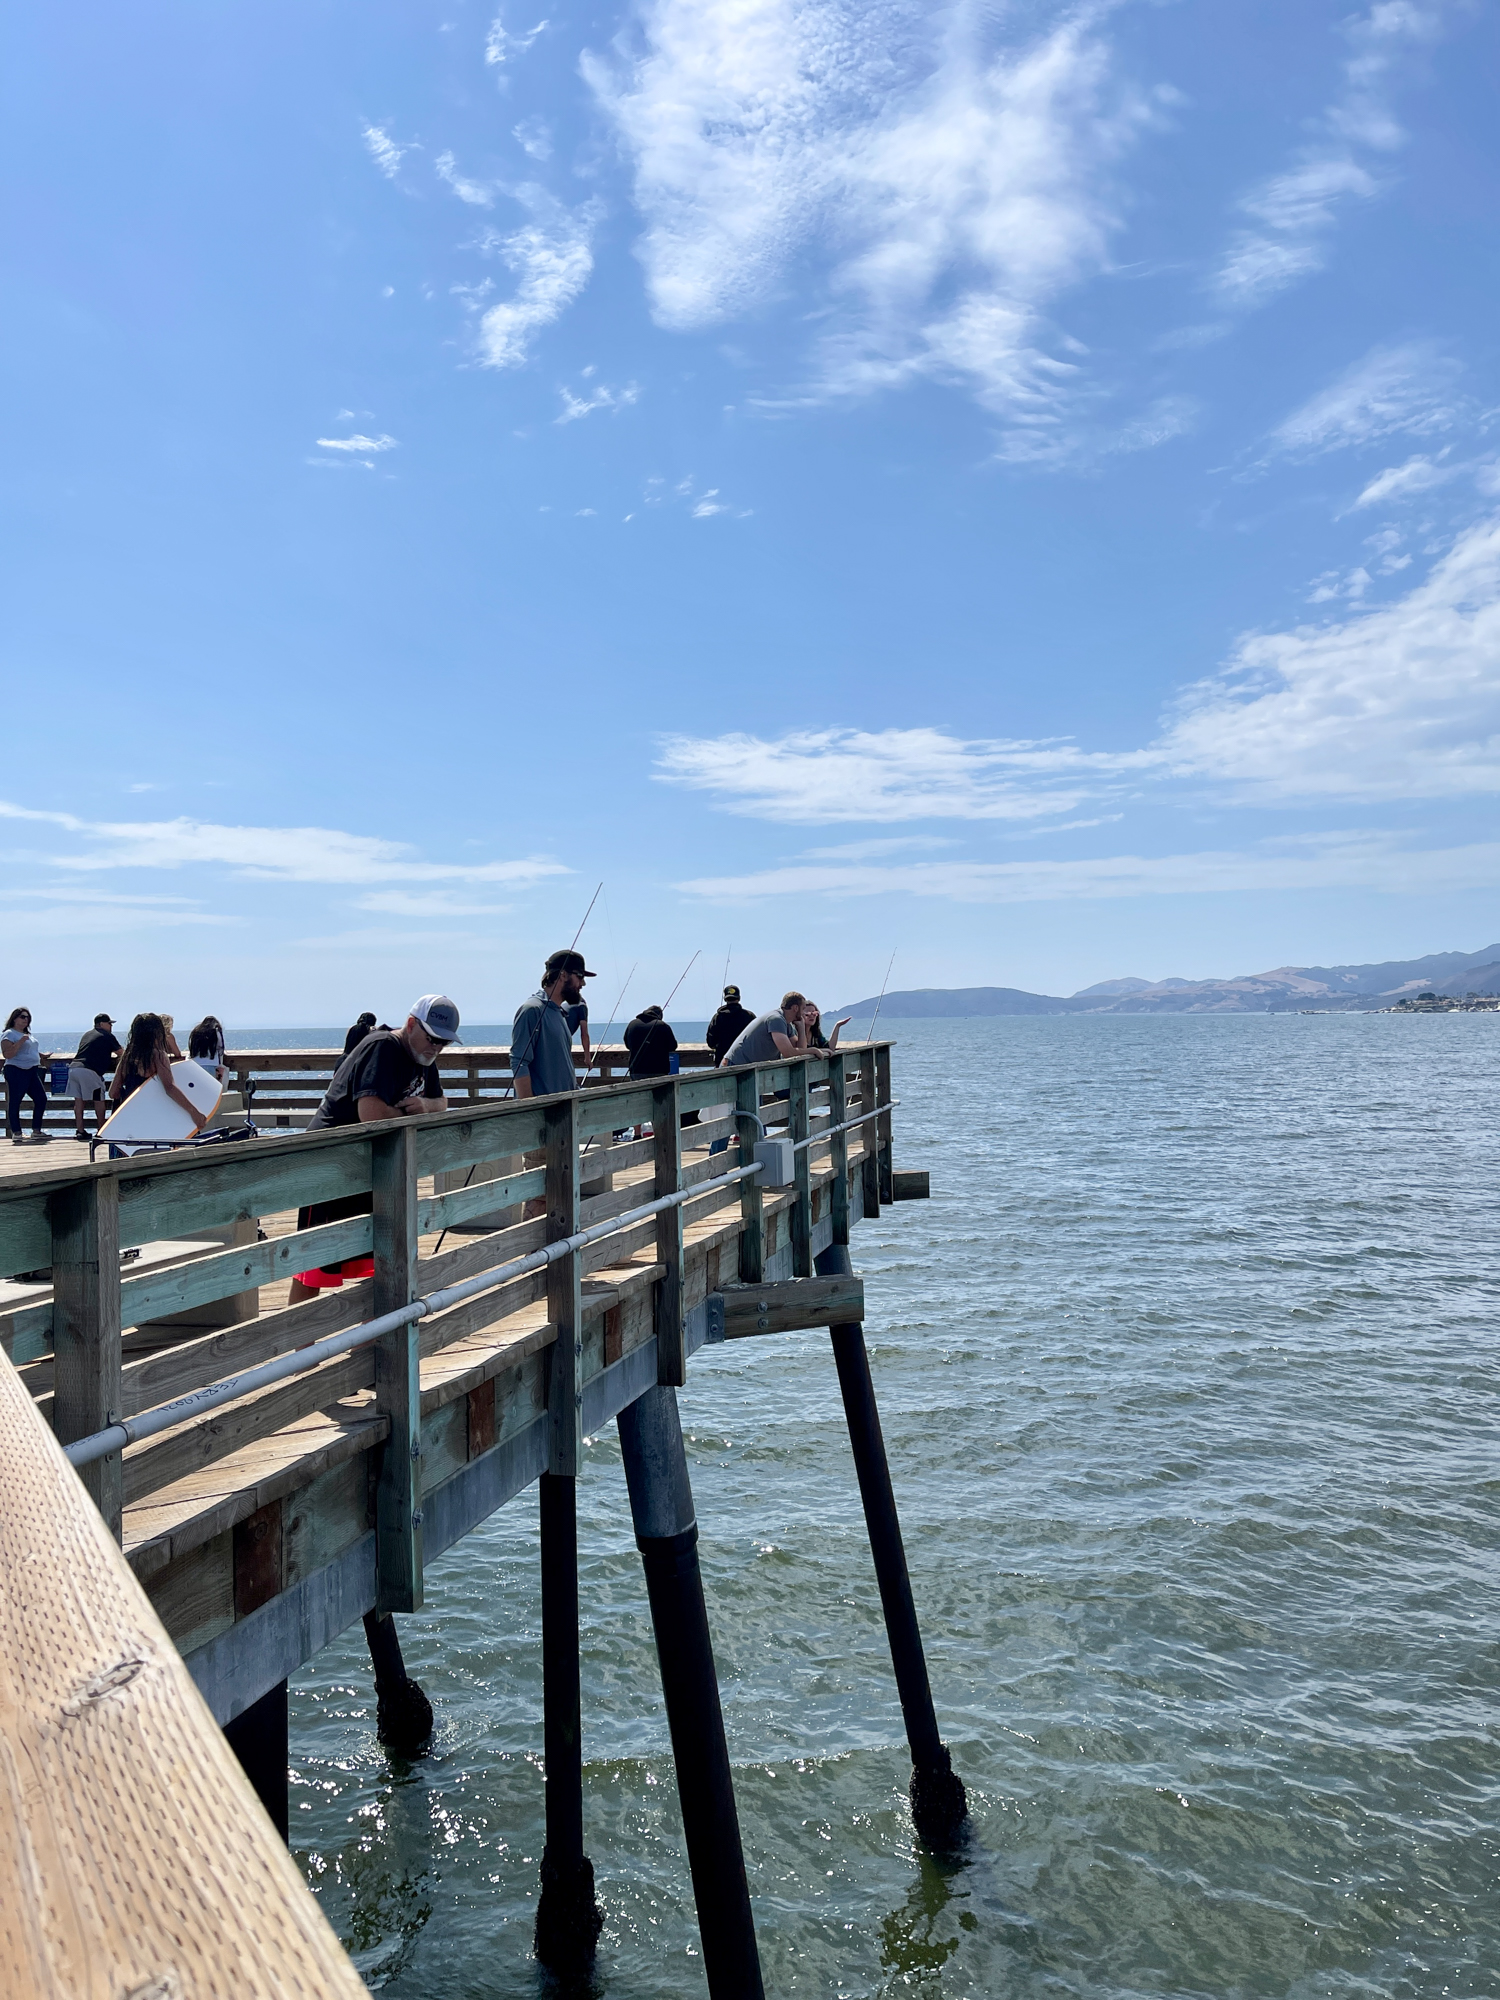 Things to do in Pismo Beach with Kids